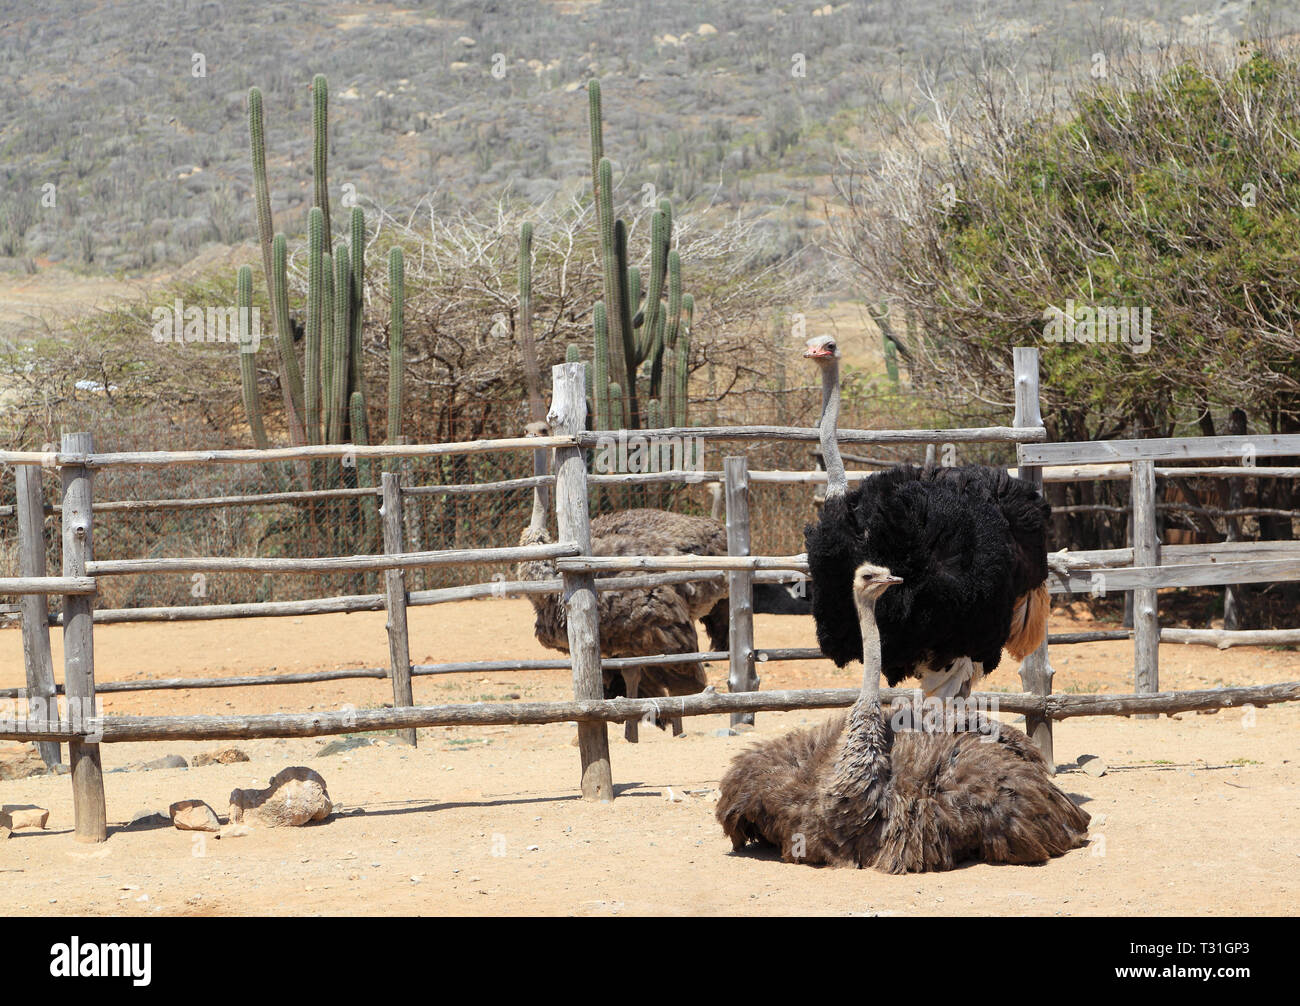 Ostriches (Struthio camelus) in their pens at the Aruba Ostrich Farm, Paradera, Aruba. The pair in the foreground are mated. Male has black feathers. Stock Photo